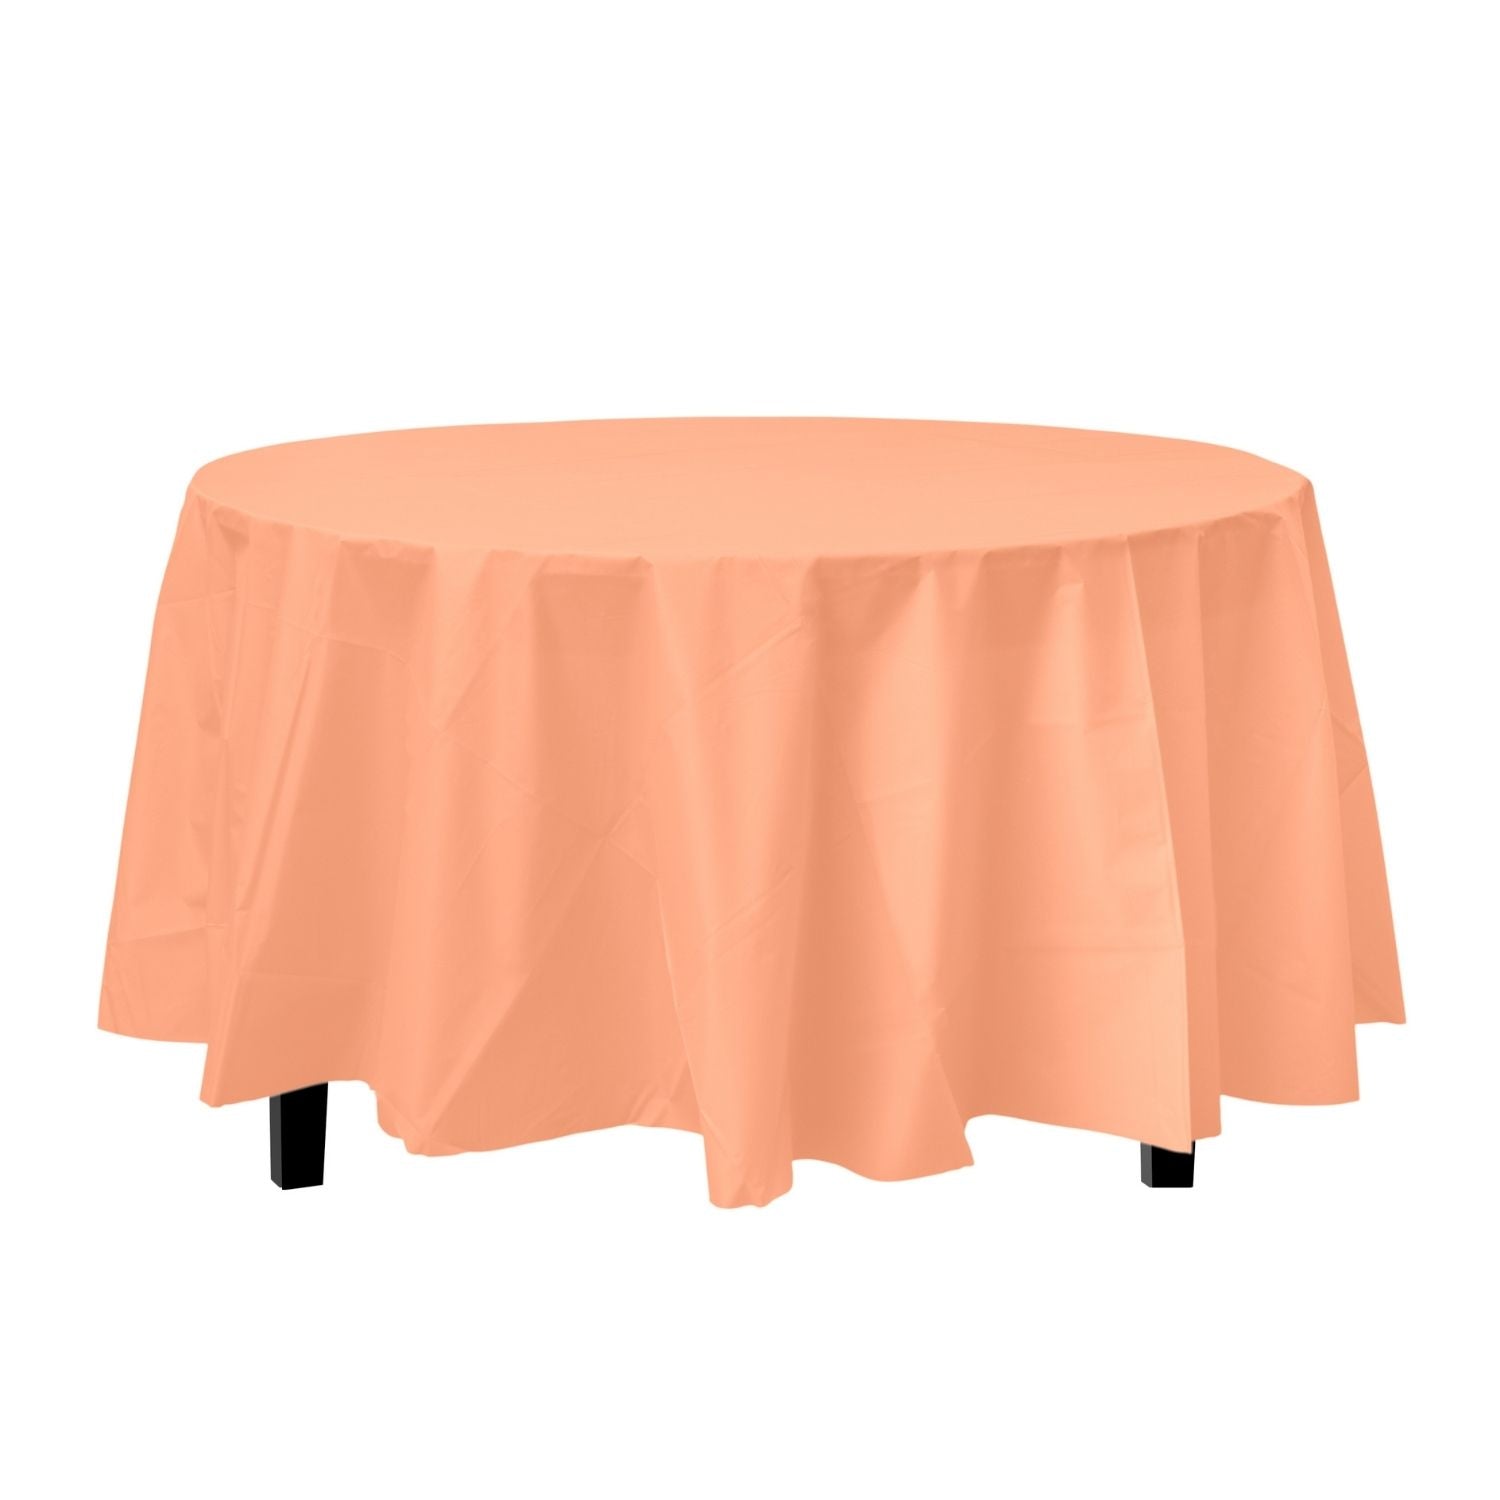 Peach Round Plastic Tablecloth | 48 Count